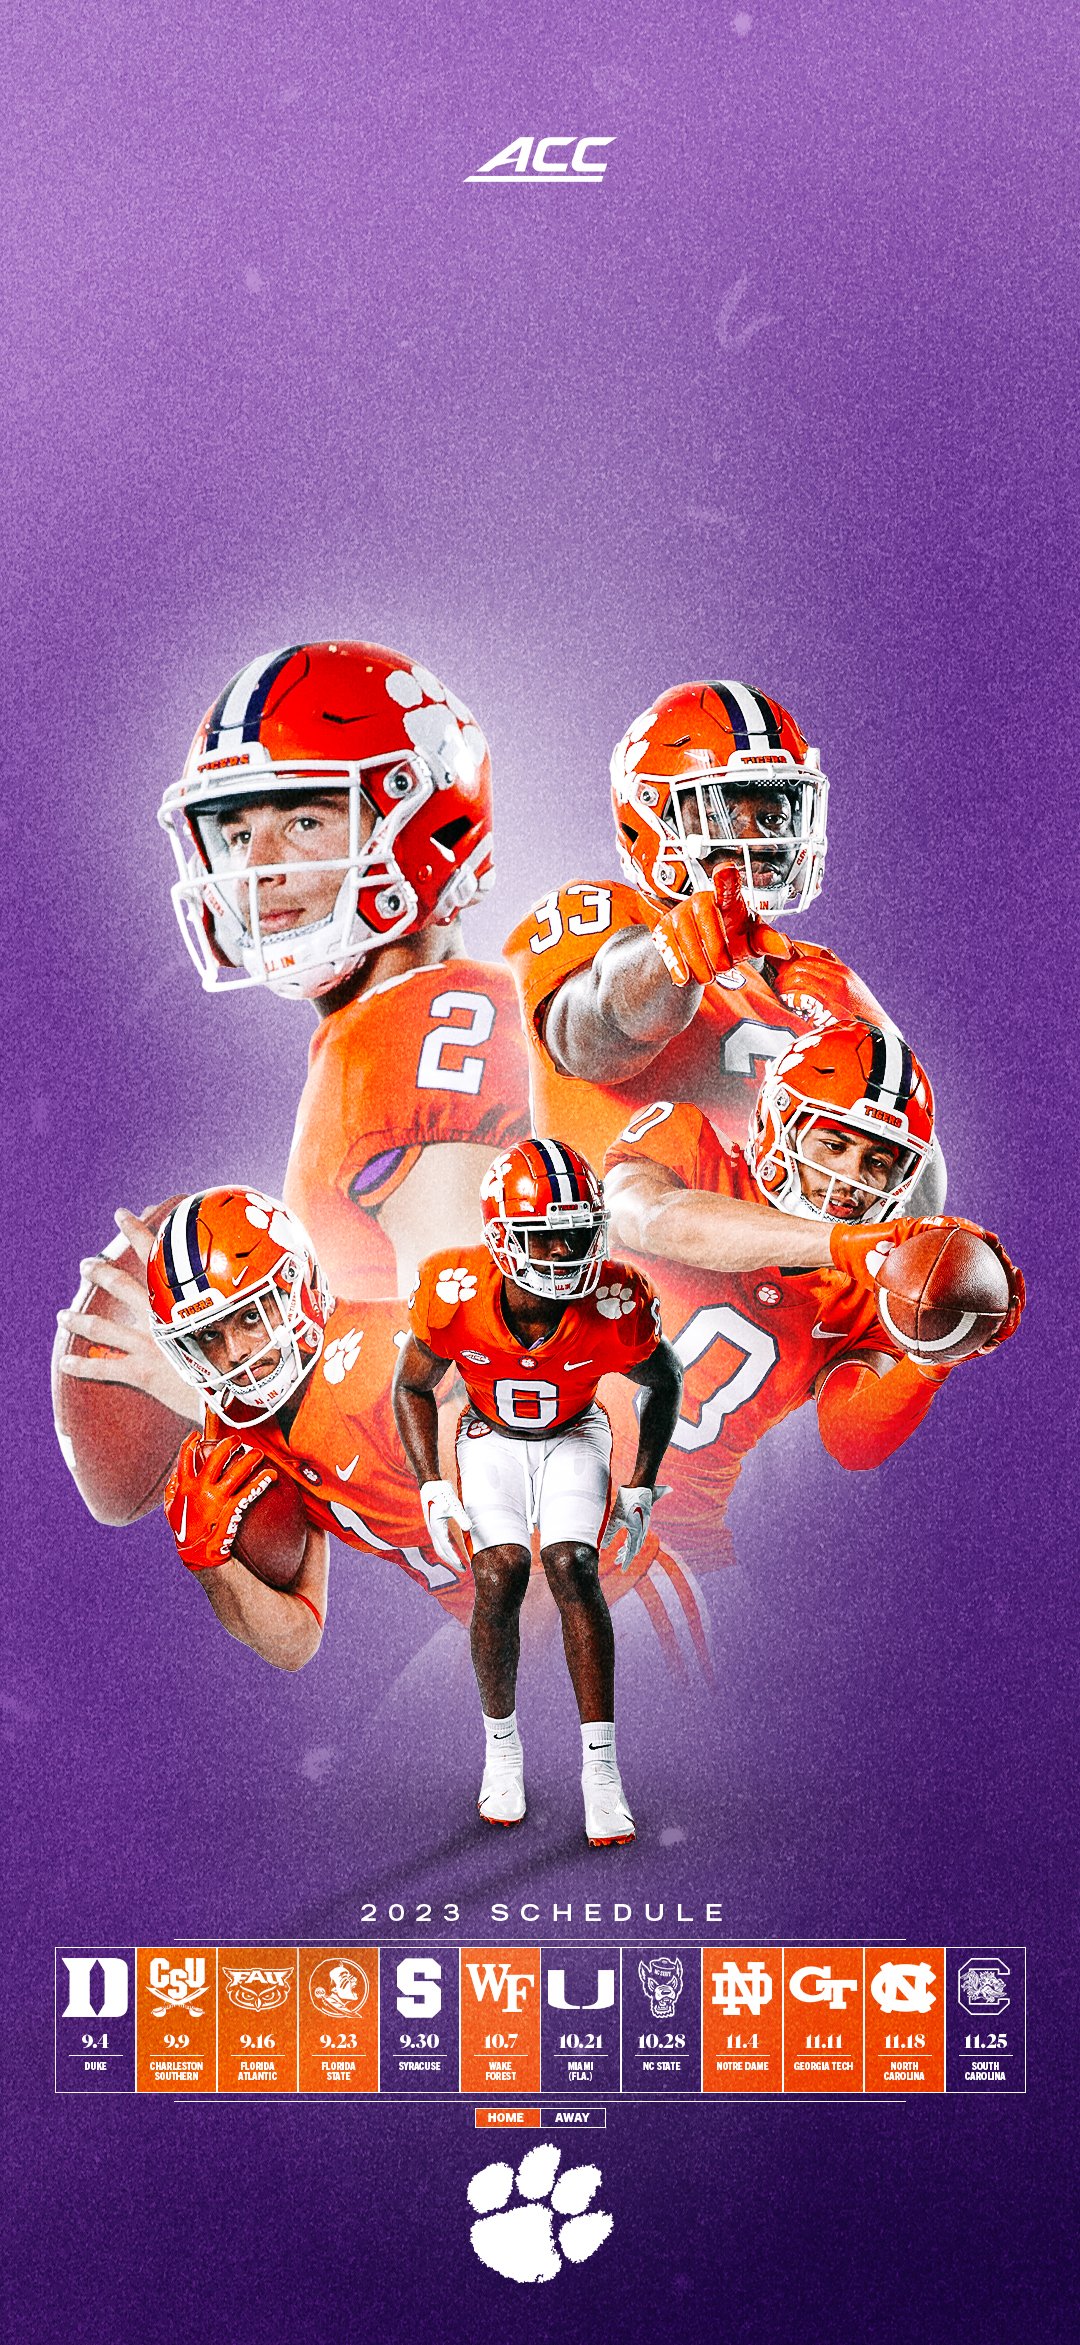 2015 Clemson Tigers football game-by-game